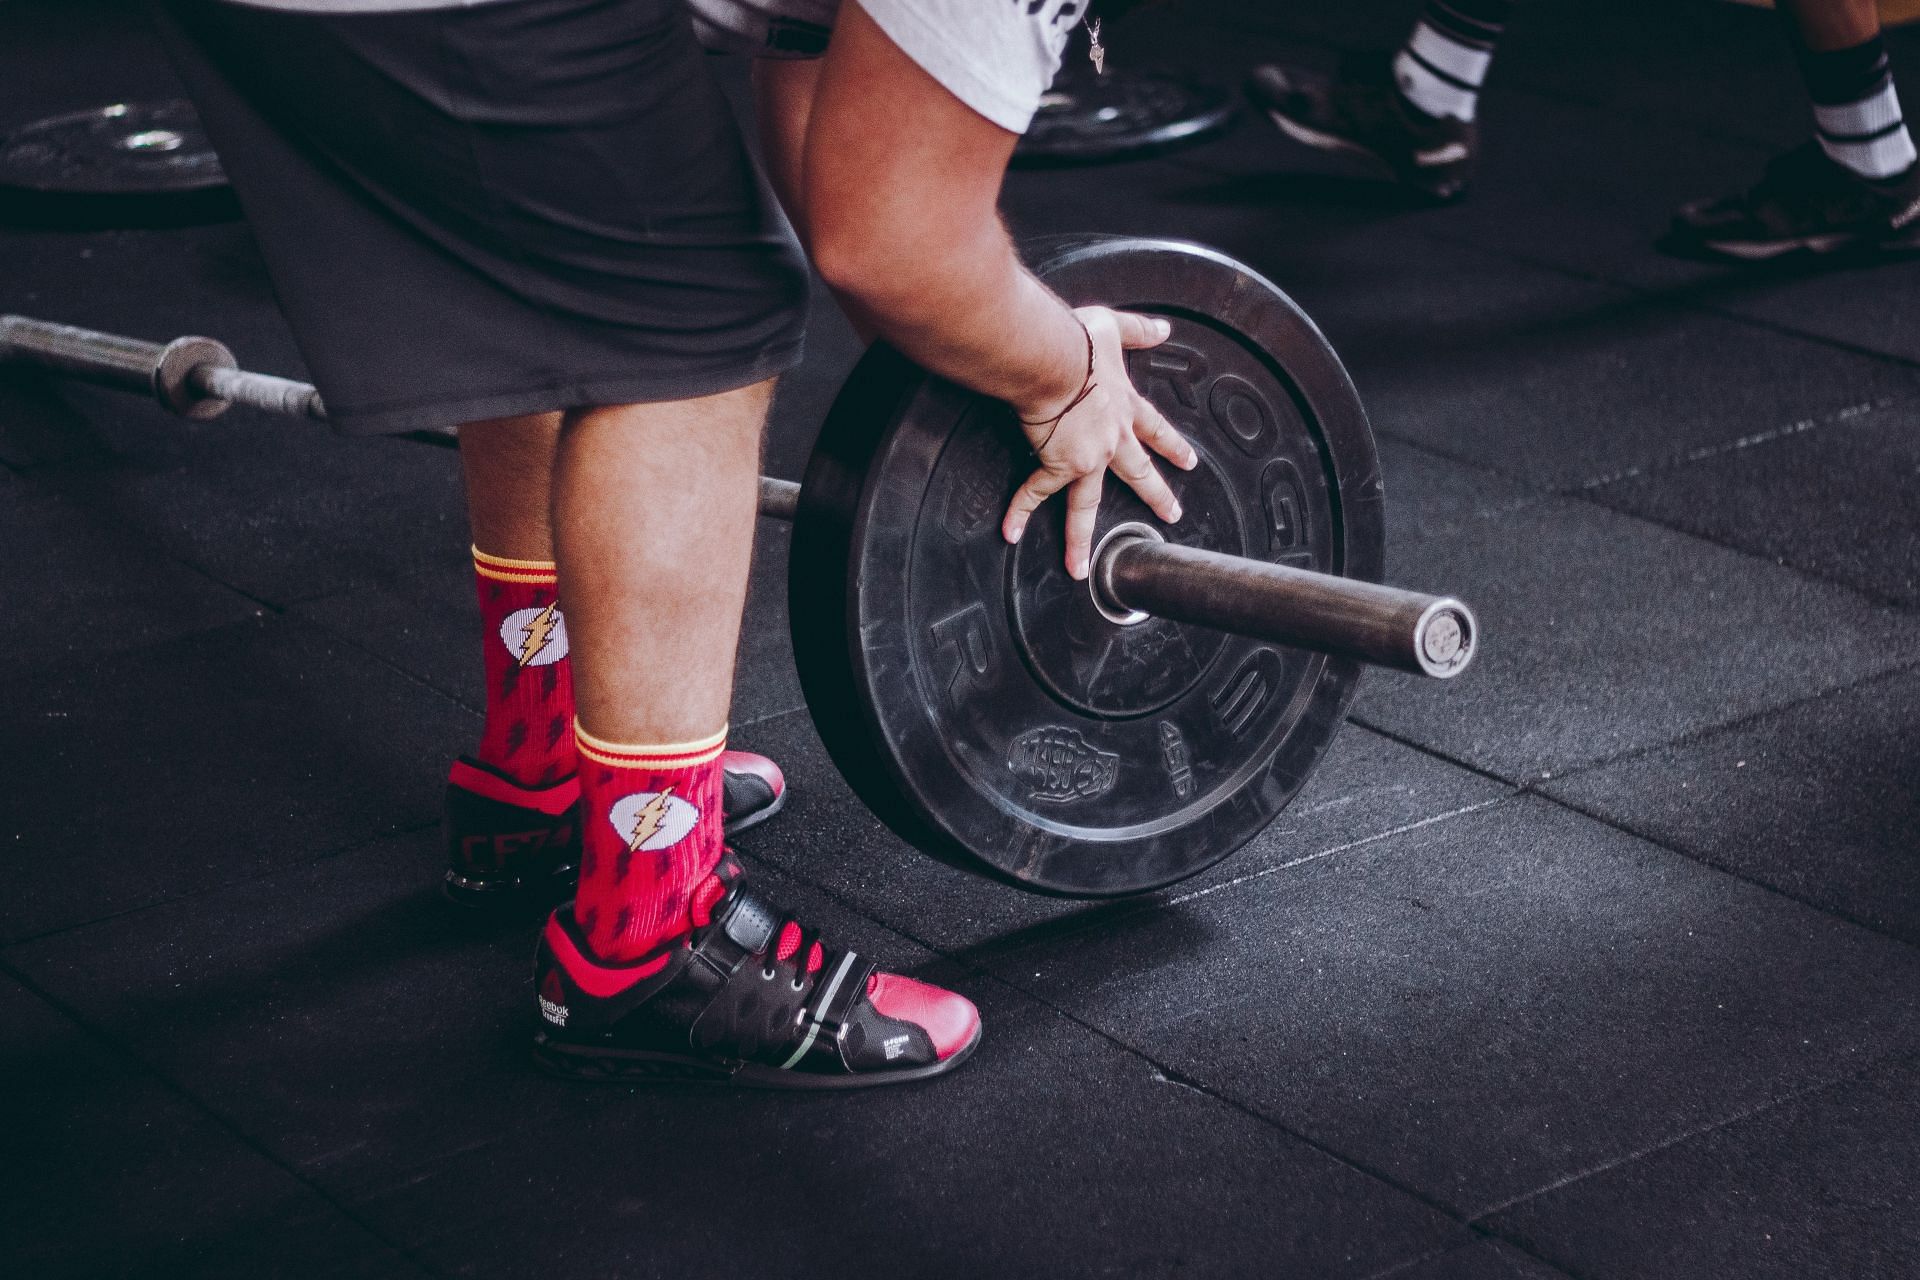 The rear delt row is an excellent exercise for ensuring that your shoulders grow proportionately. (Image via Unsplash/ Victor Freitas)